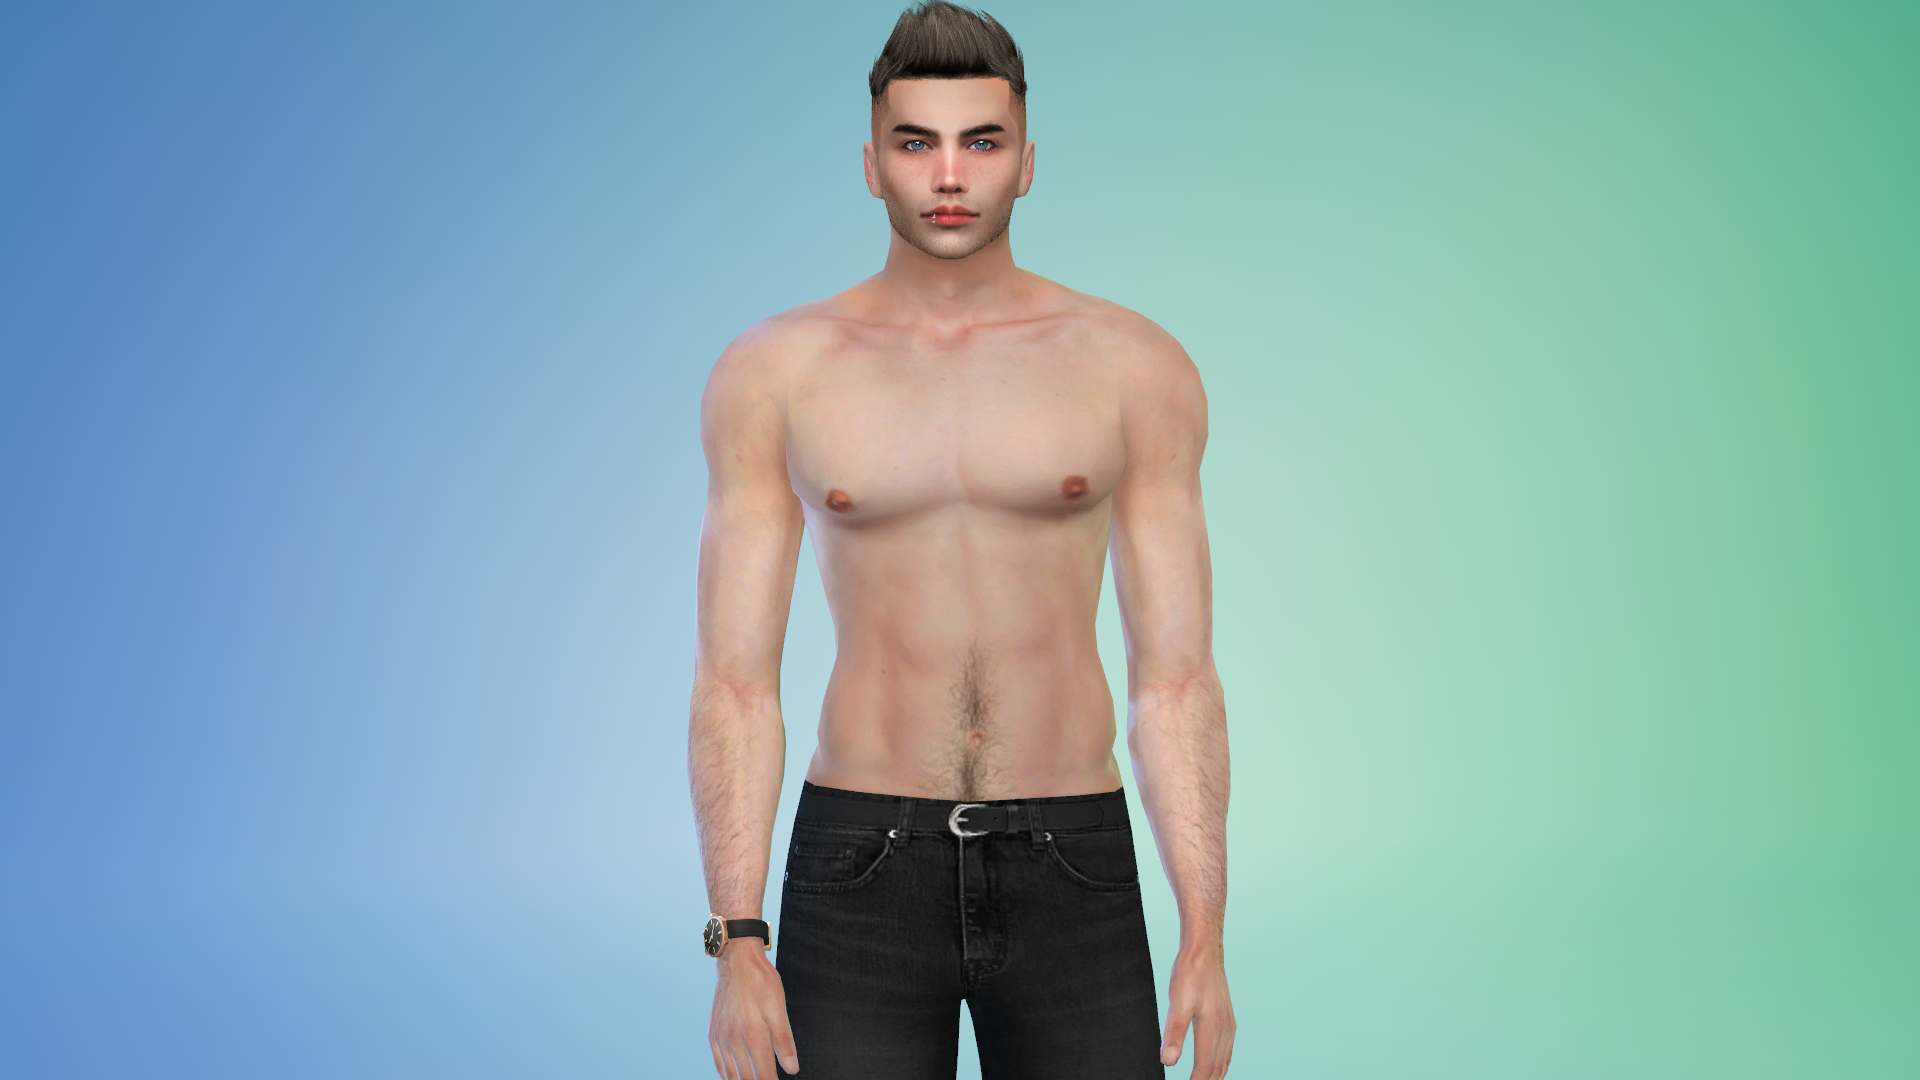 Share Your Male Sims! - Page 129 - The Sims 4 General Discussion ...